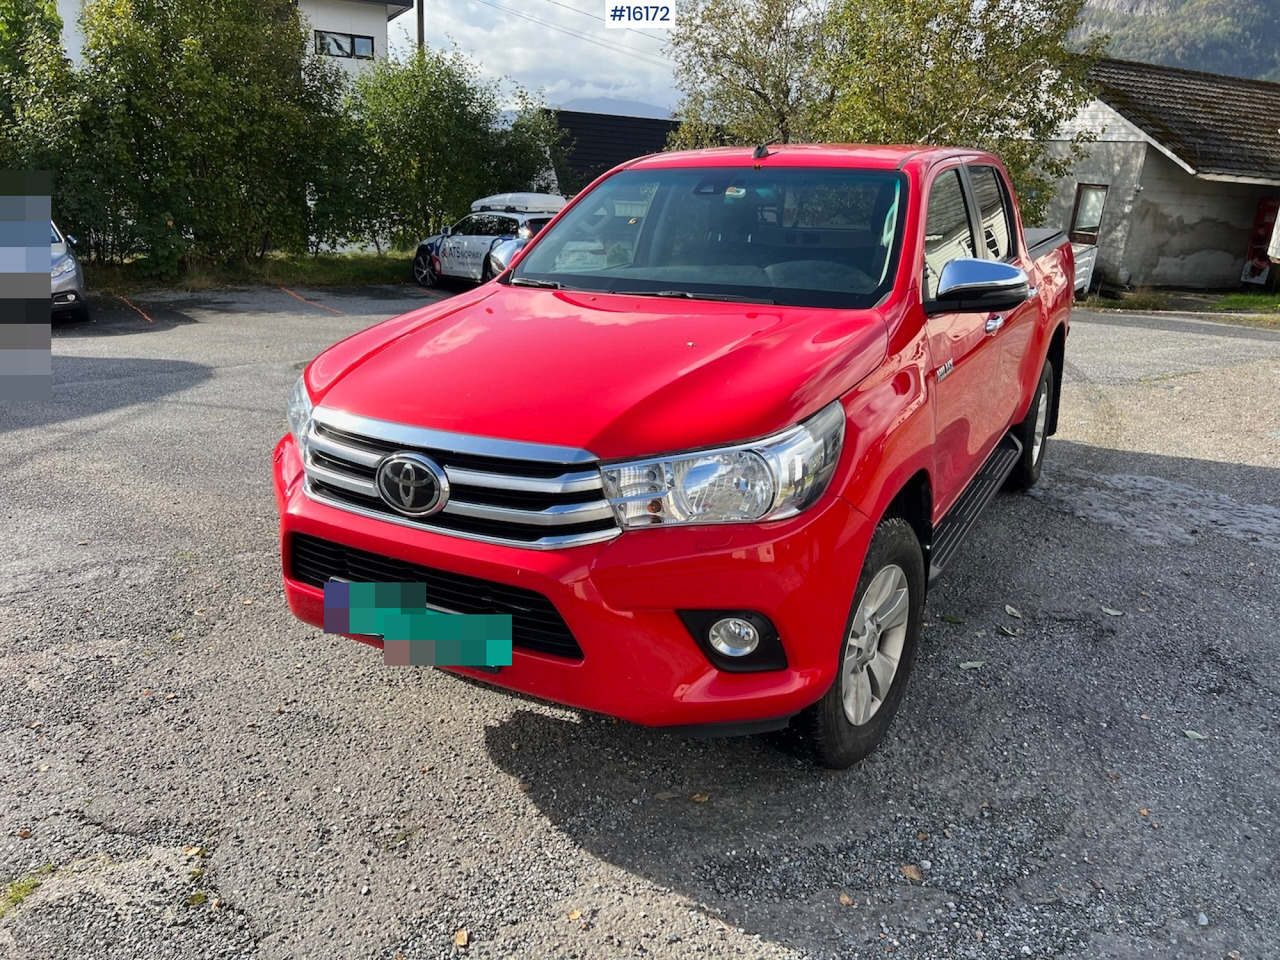 Pick-up Toyota Hilux: photos 4